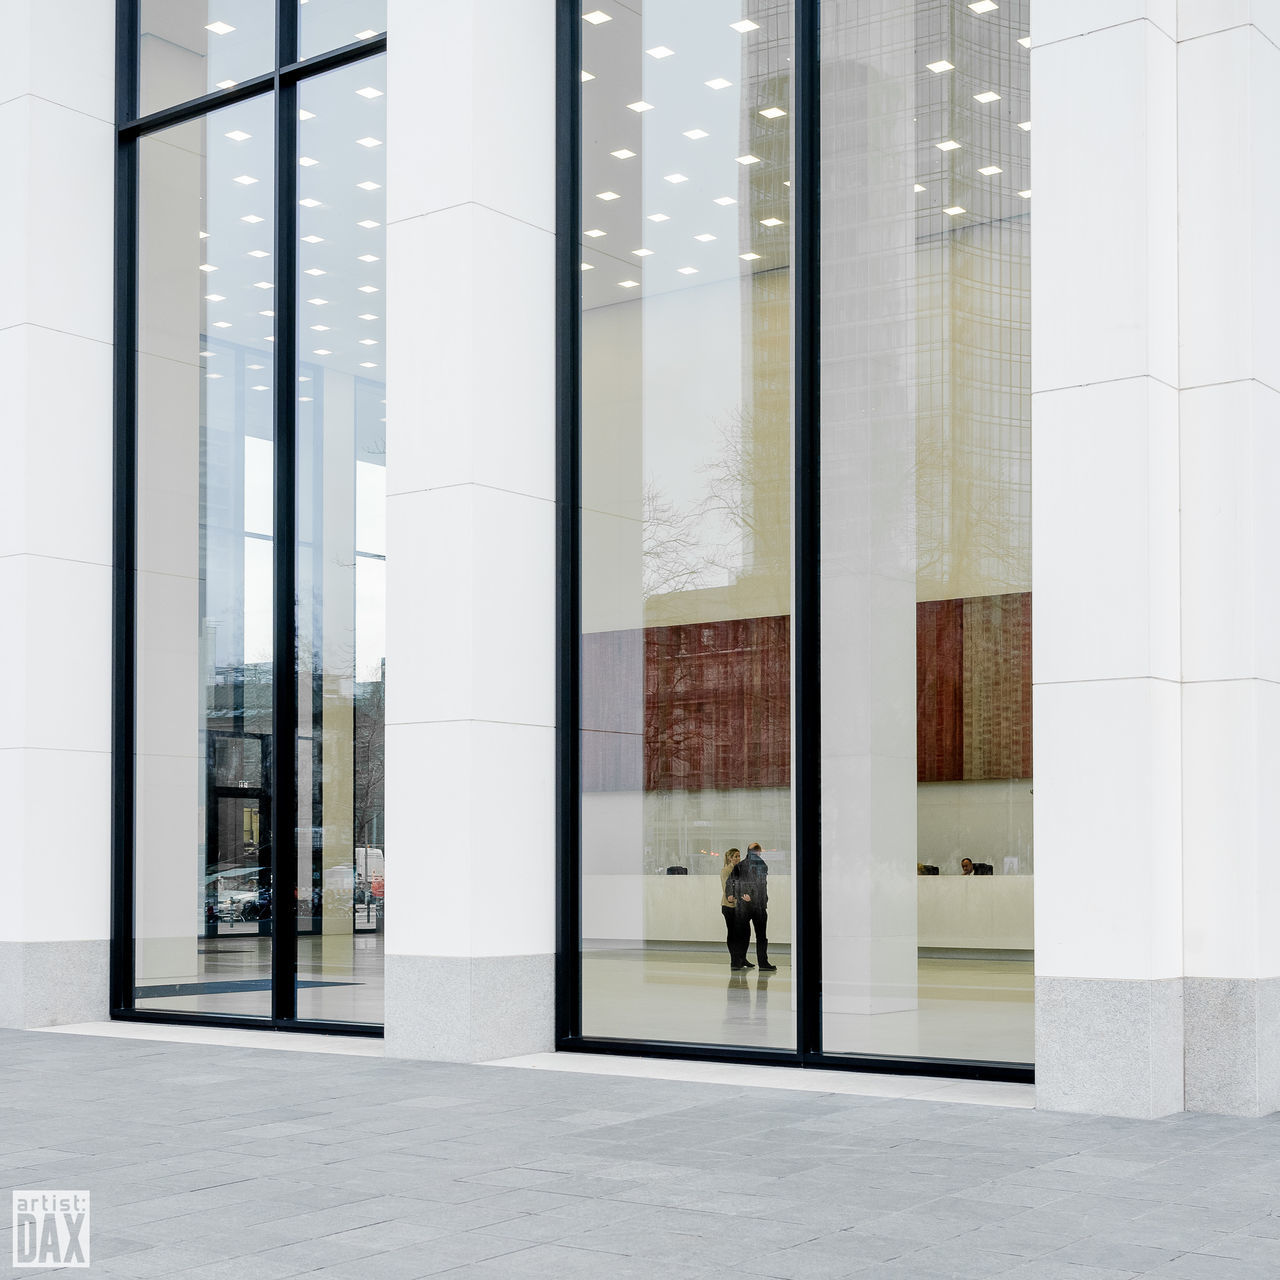 architecture, window, built structure, building exterior, indoors, glass - material, door, building, men, transparent, person, day, city, lifestyles, closed, entrance, corridor, walking